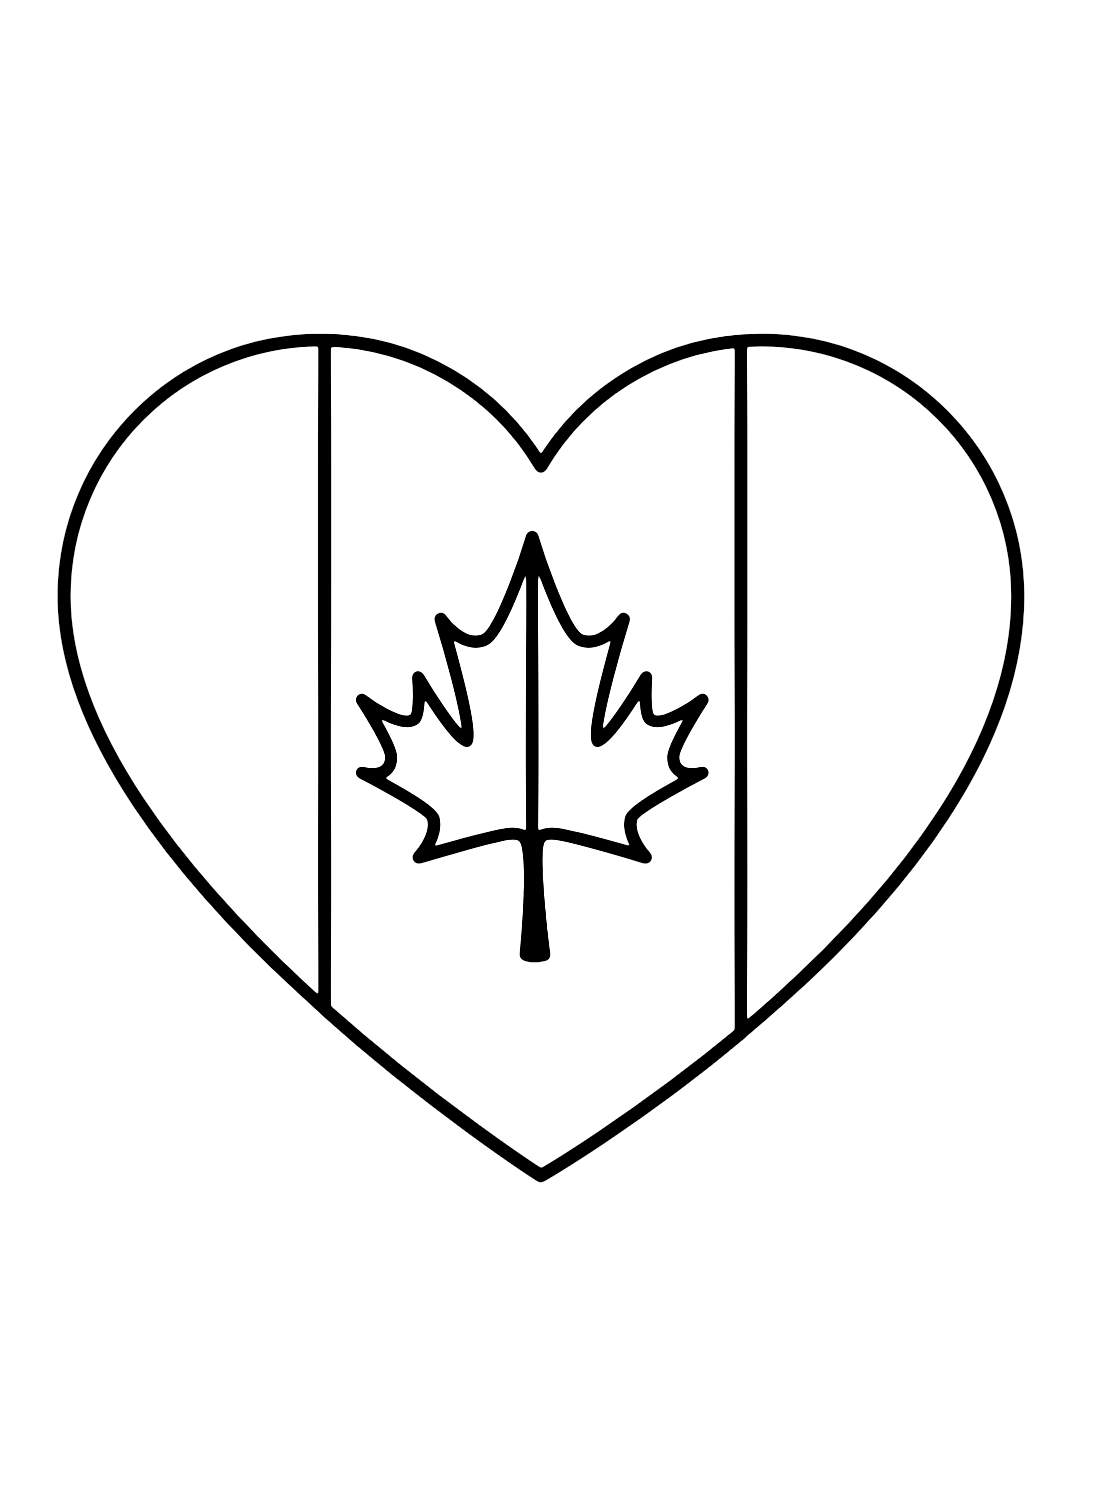 Canadian Flag with Heart Shape Coloring Page